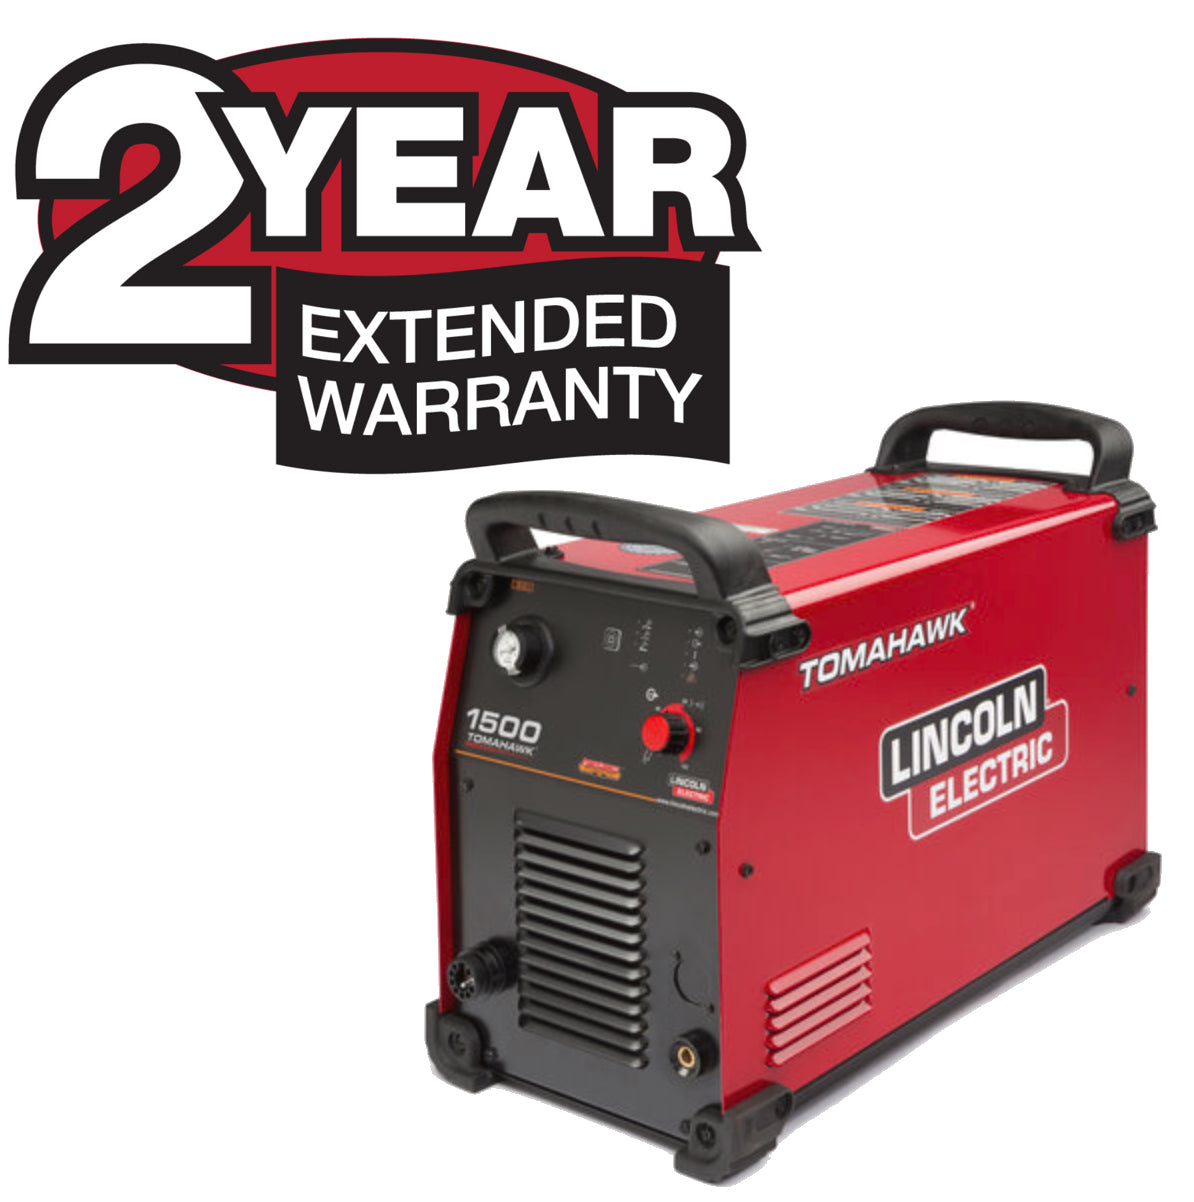 Lincoln 2-Year Extended Warranty - Tomahawk 1500 X2809